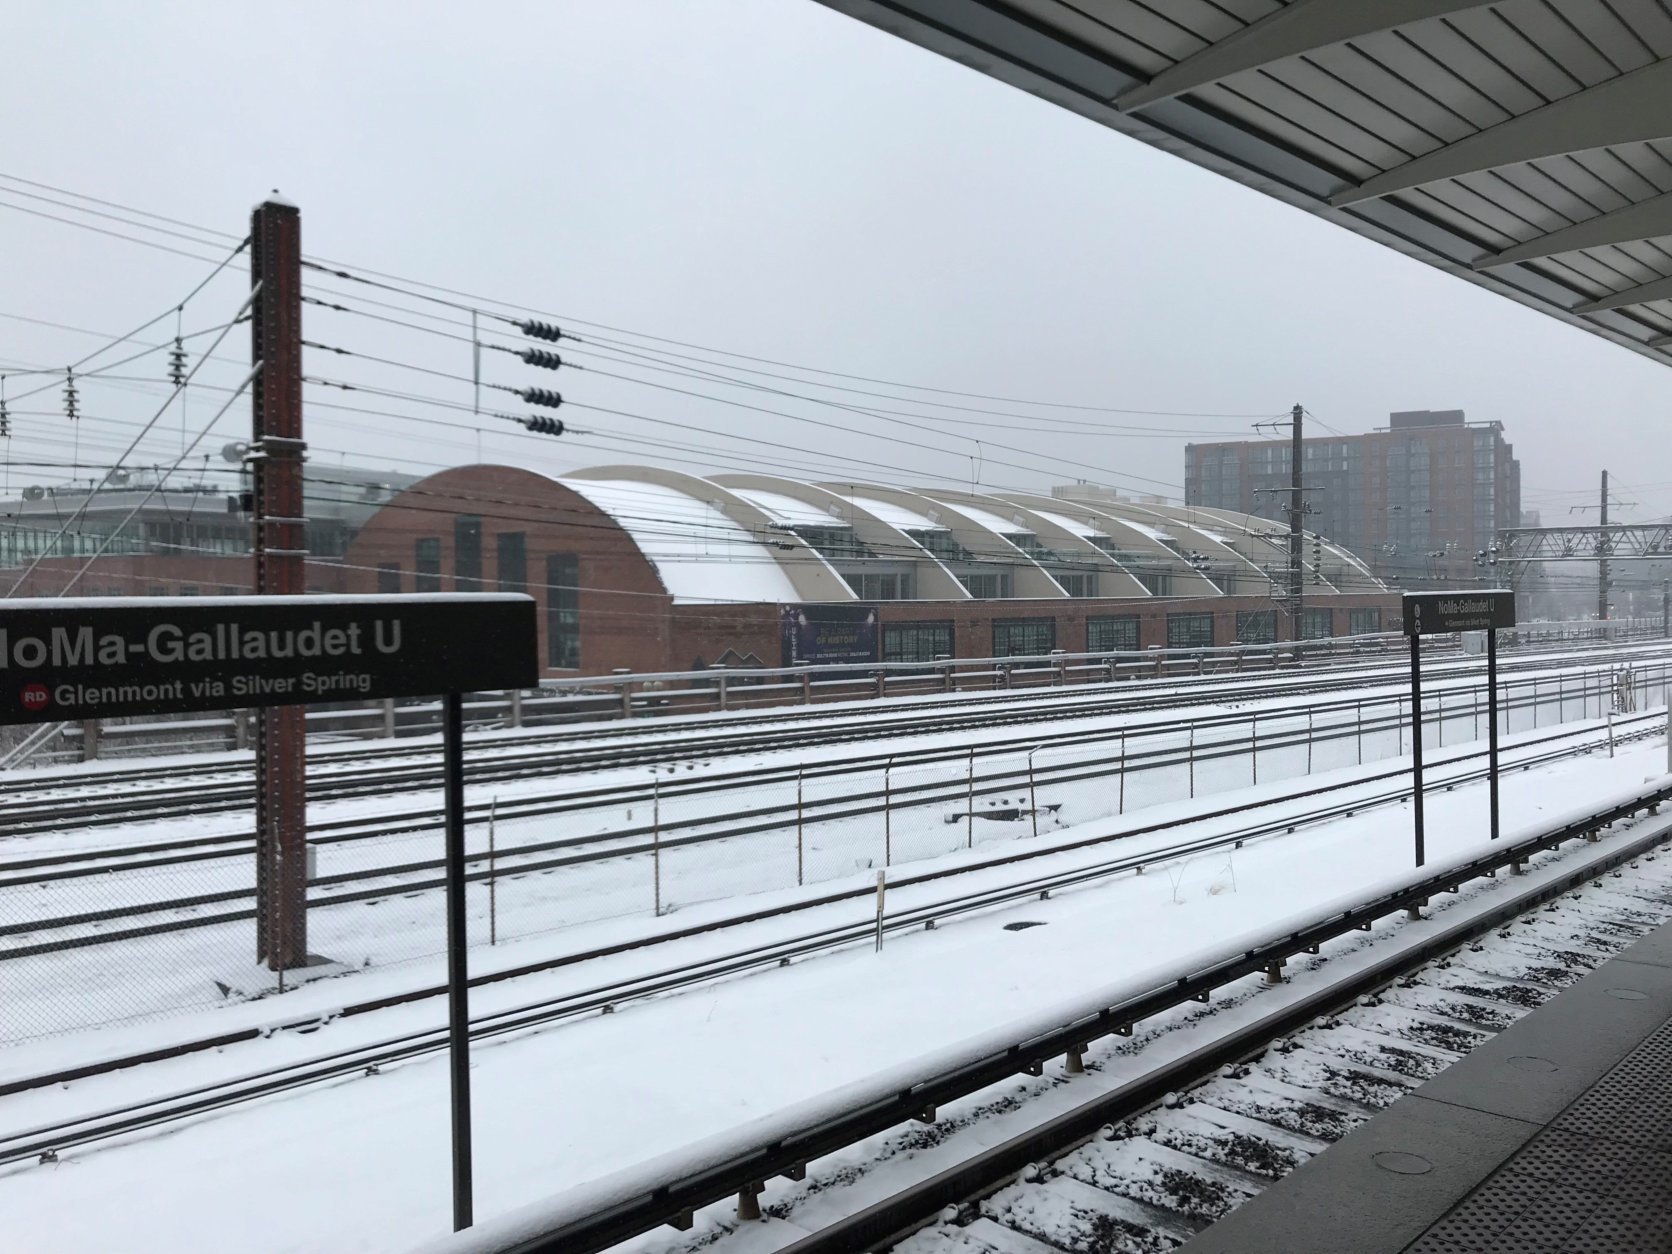 The NoMa-Gallaudet Metro station got a coating of snow Wednesday. (WTOP/Chris Cichon)